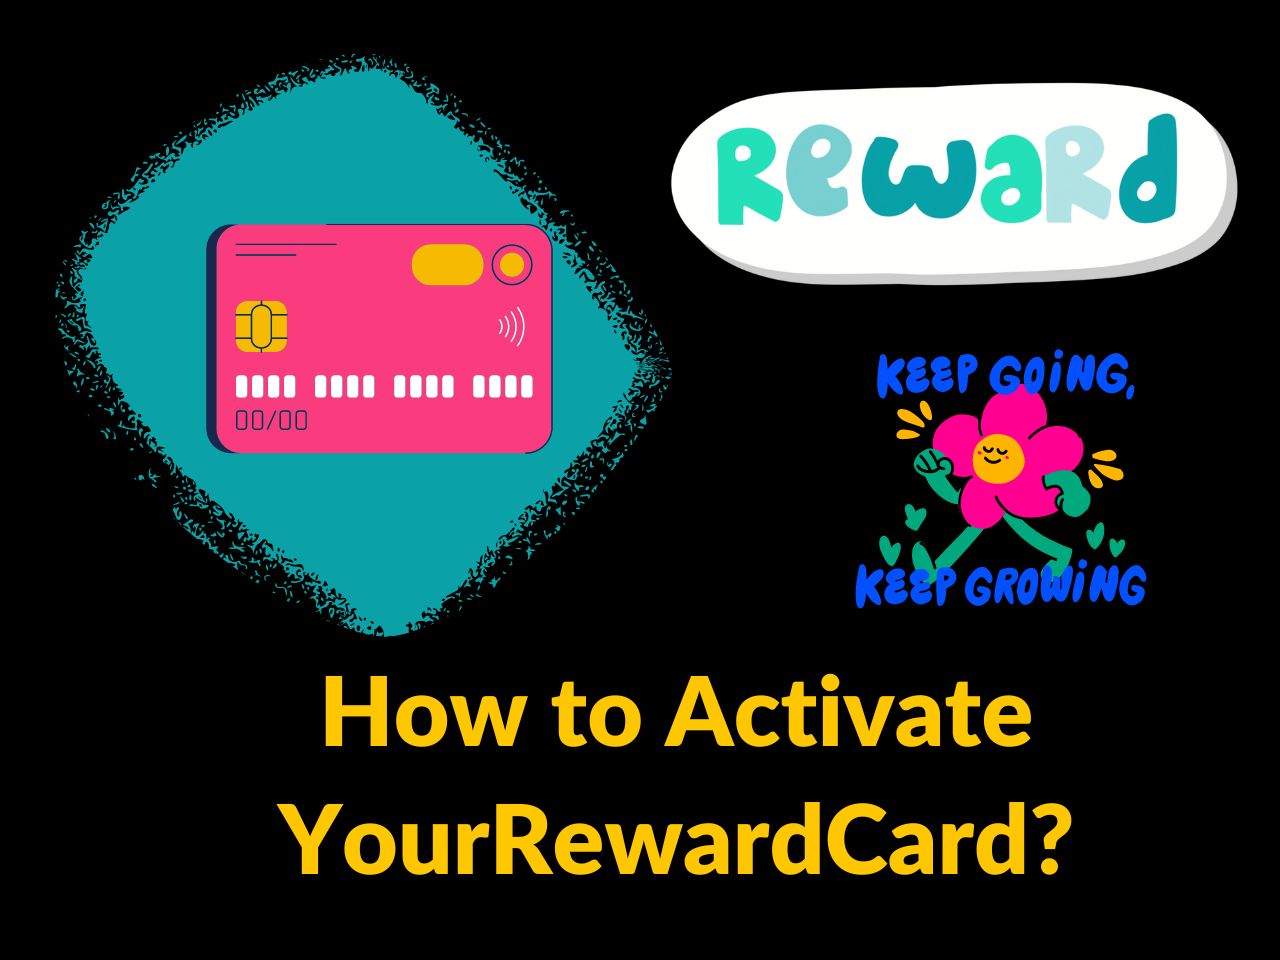 How to Activate YourRewardCard?